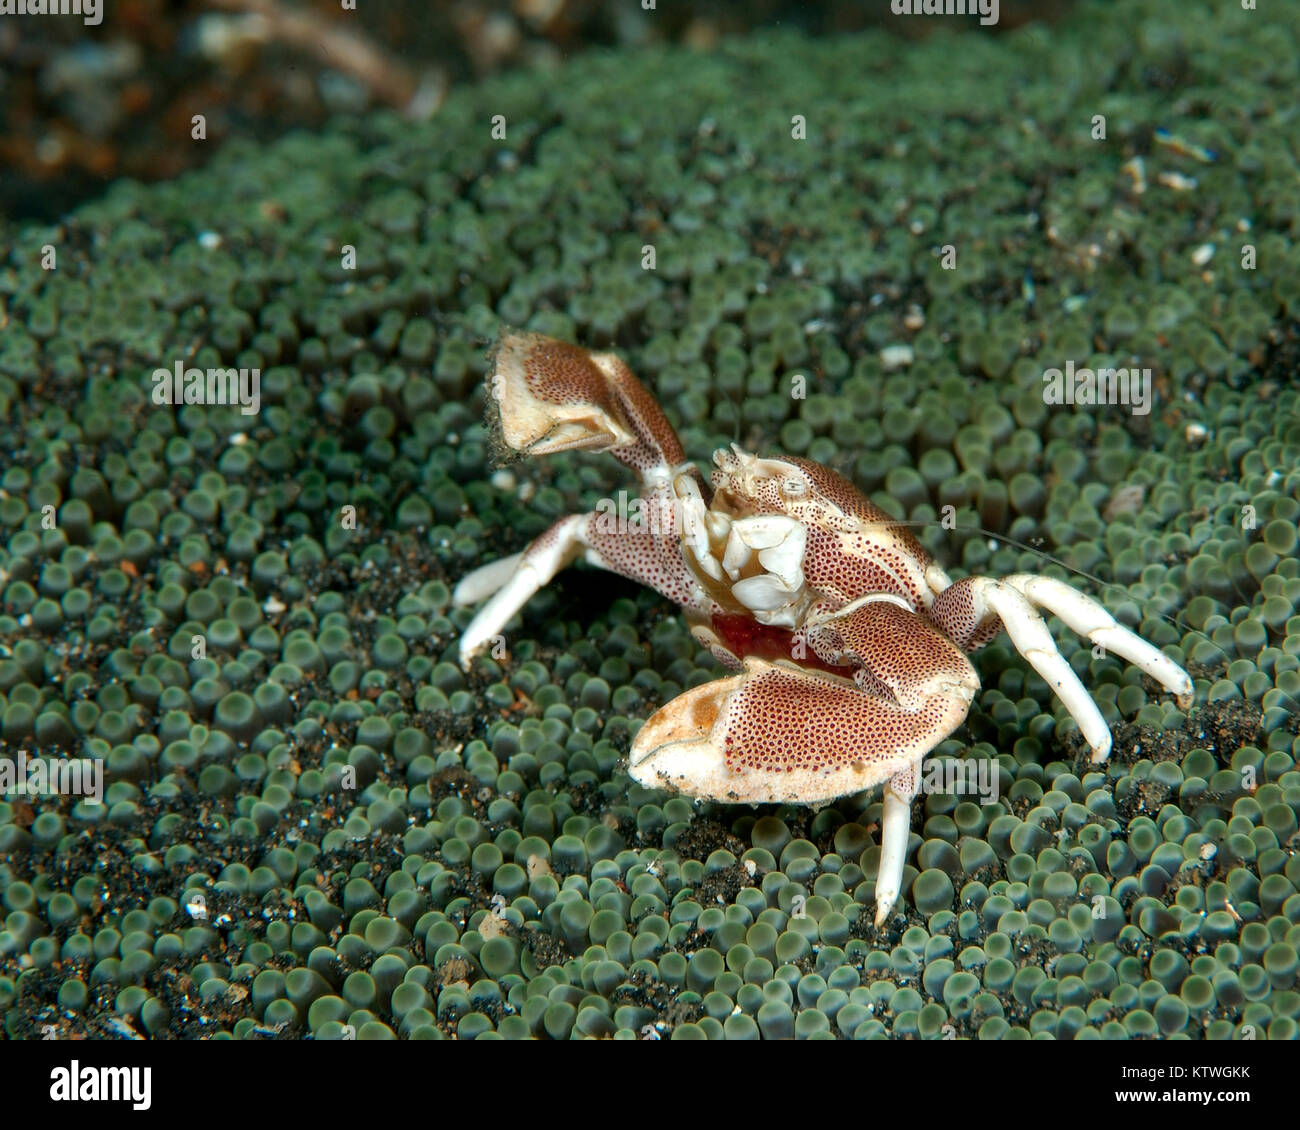 PORCELEAN CRAB (NEOPETROLISTHES SP.) STANDING ON GREEN ANENOME WITH OUTSTRETCHED CLAWS Stock Photo